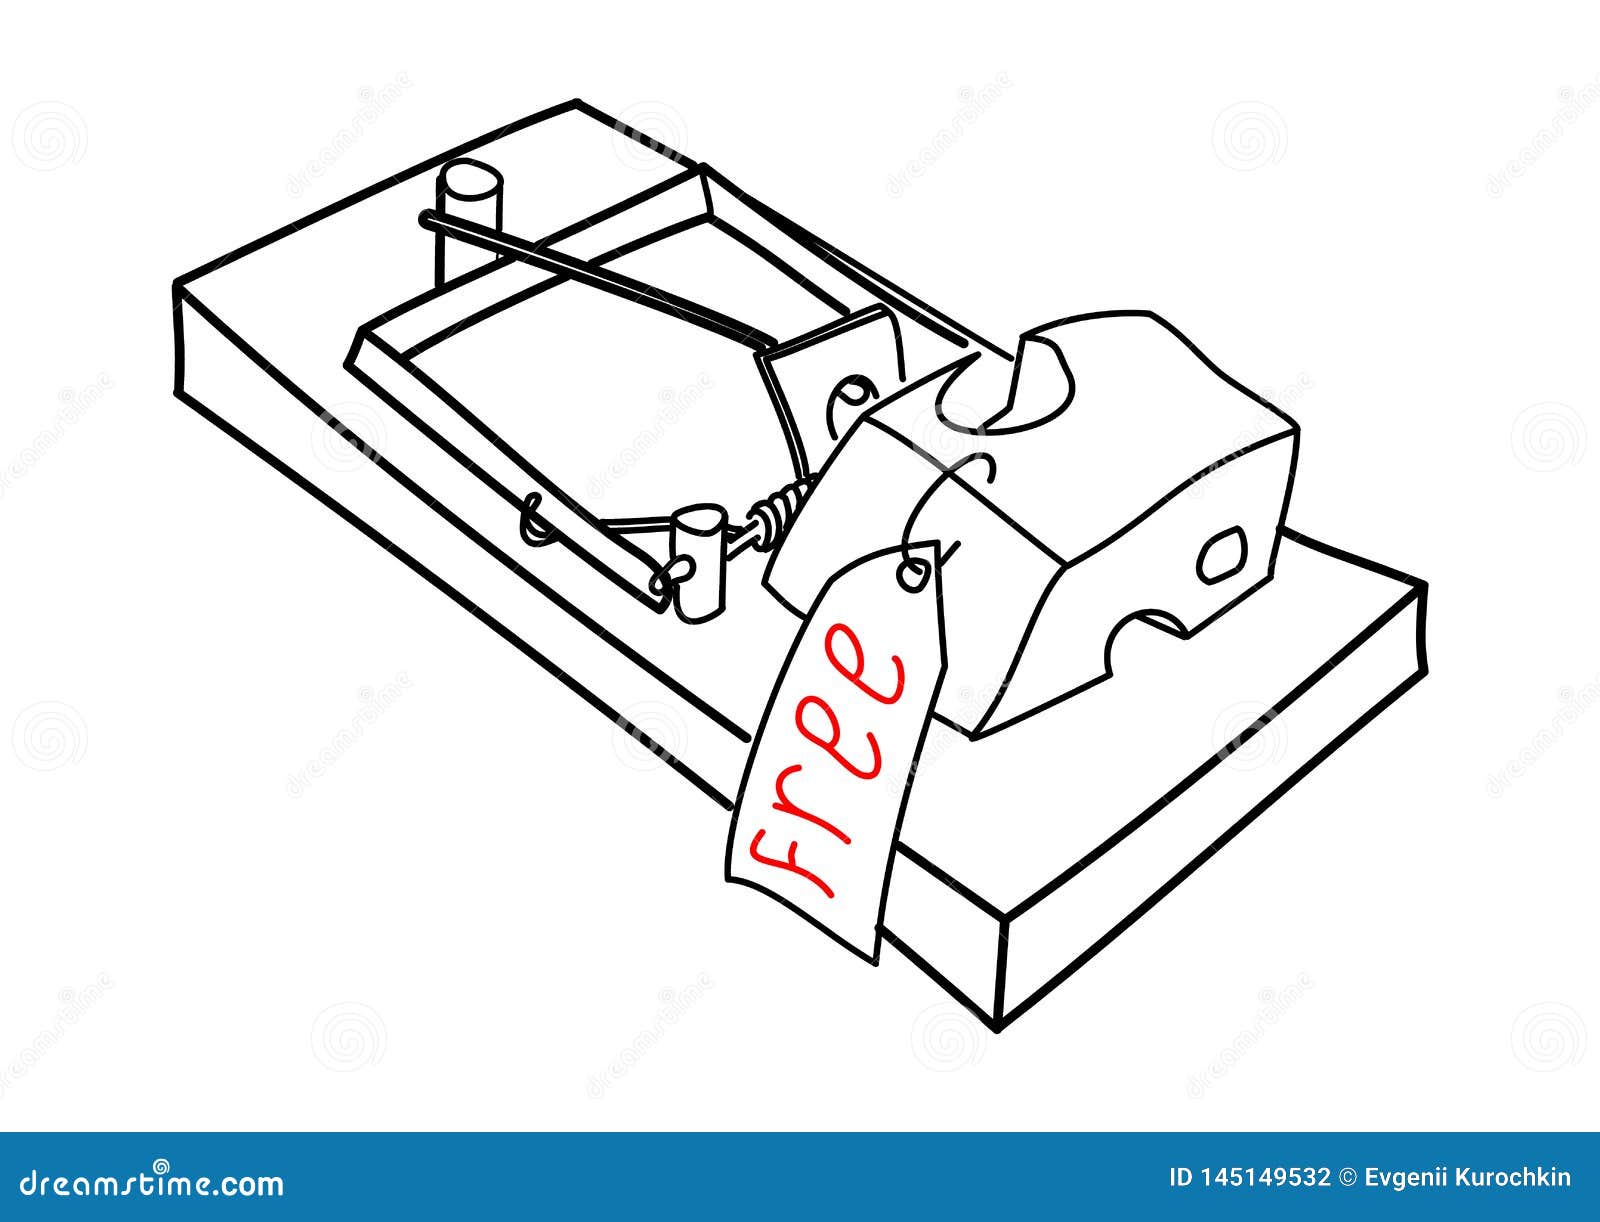 mousetrap with free cheese sign entrapment concept